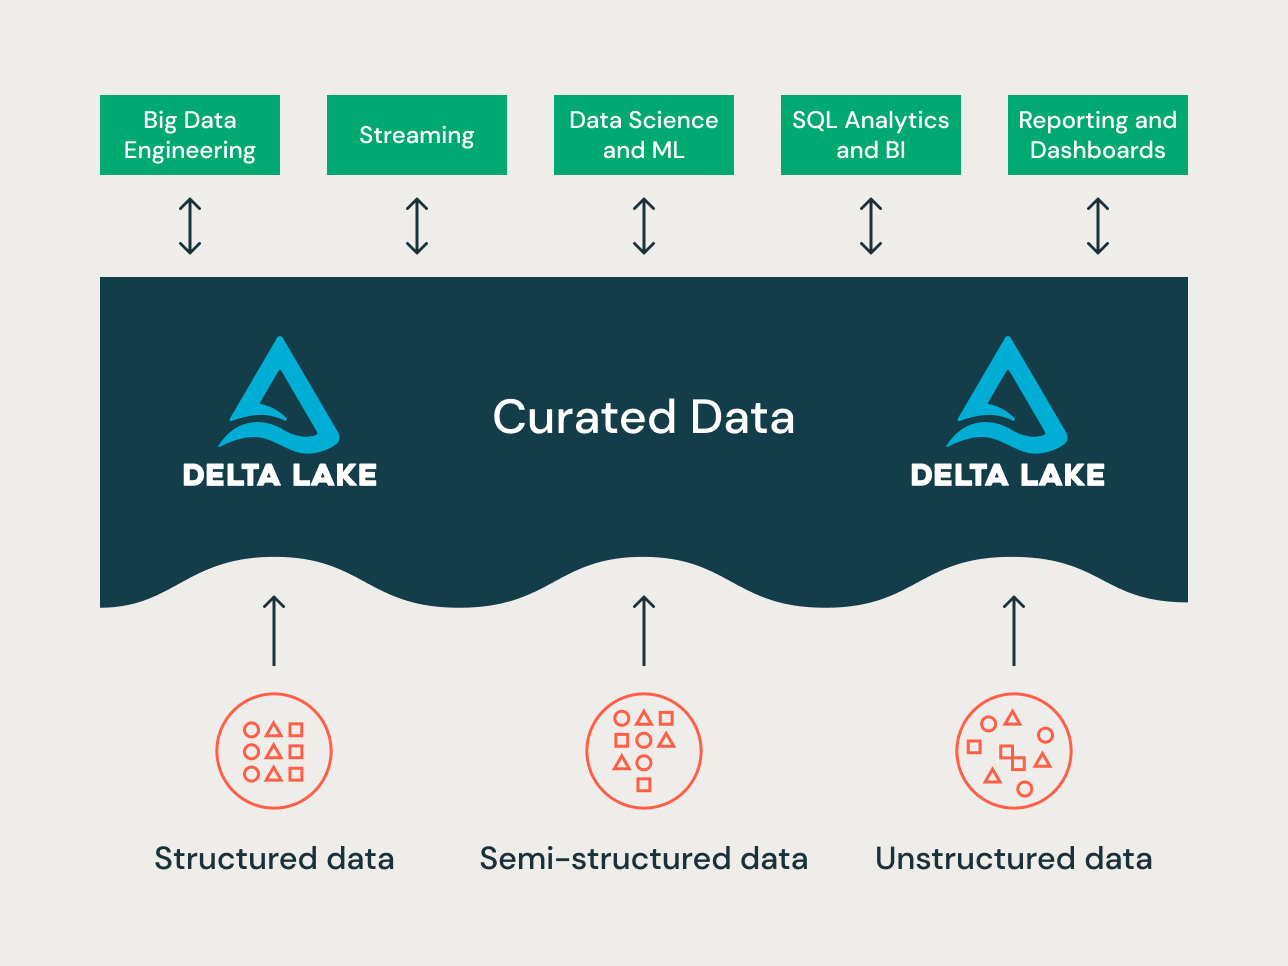 Data is curated as it moves through the different layers of a Lakehouse.